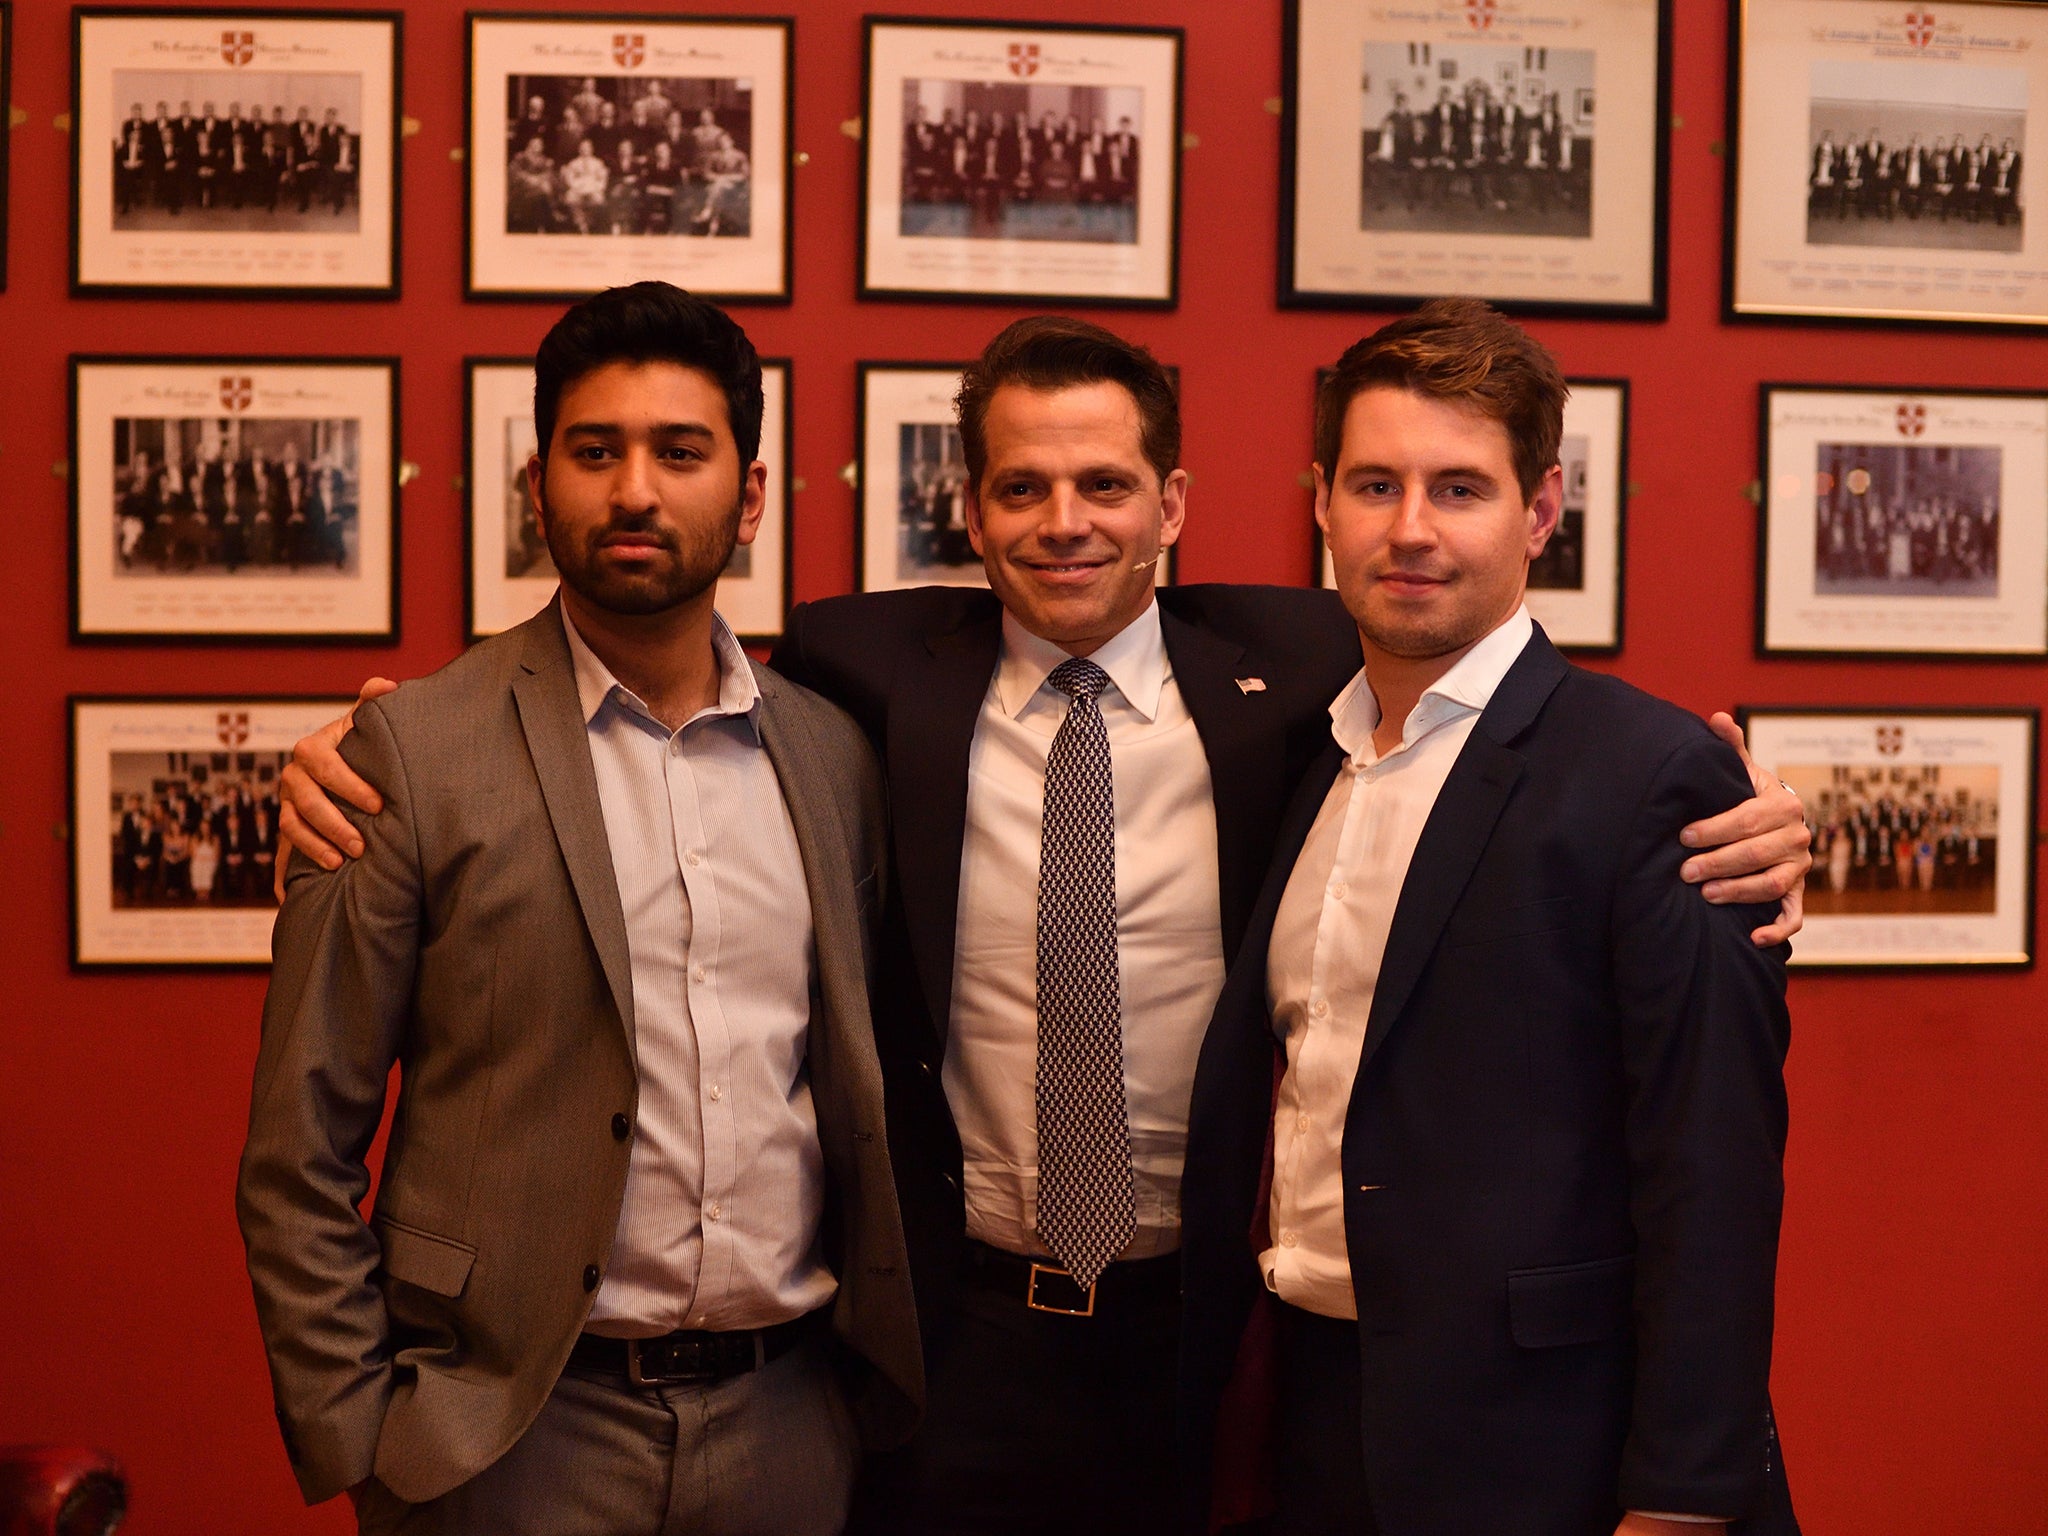 Mr Scaramucci poses for a photo with reporters Shehab Khan and Ben Kentish at the Cambridge Union (Getty)